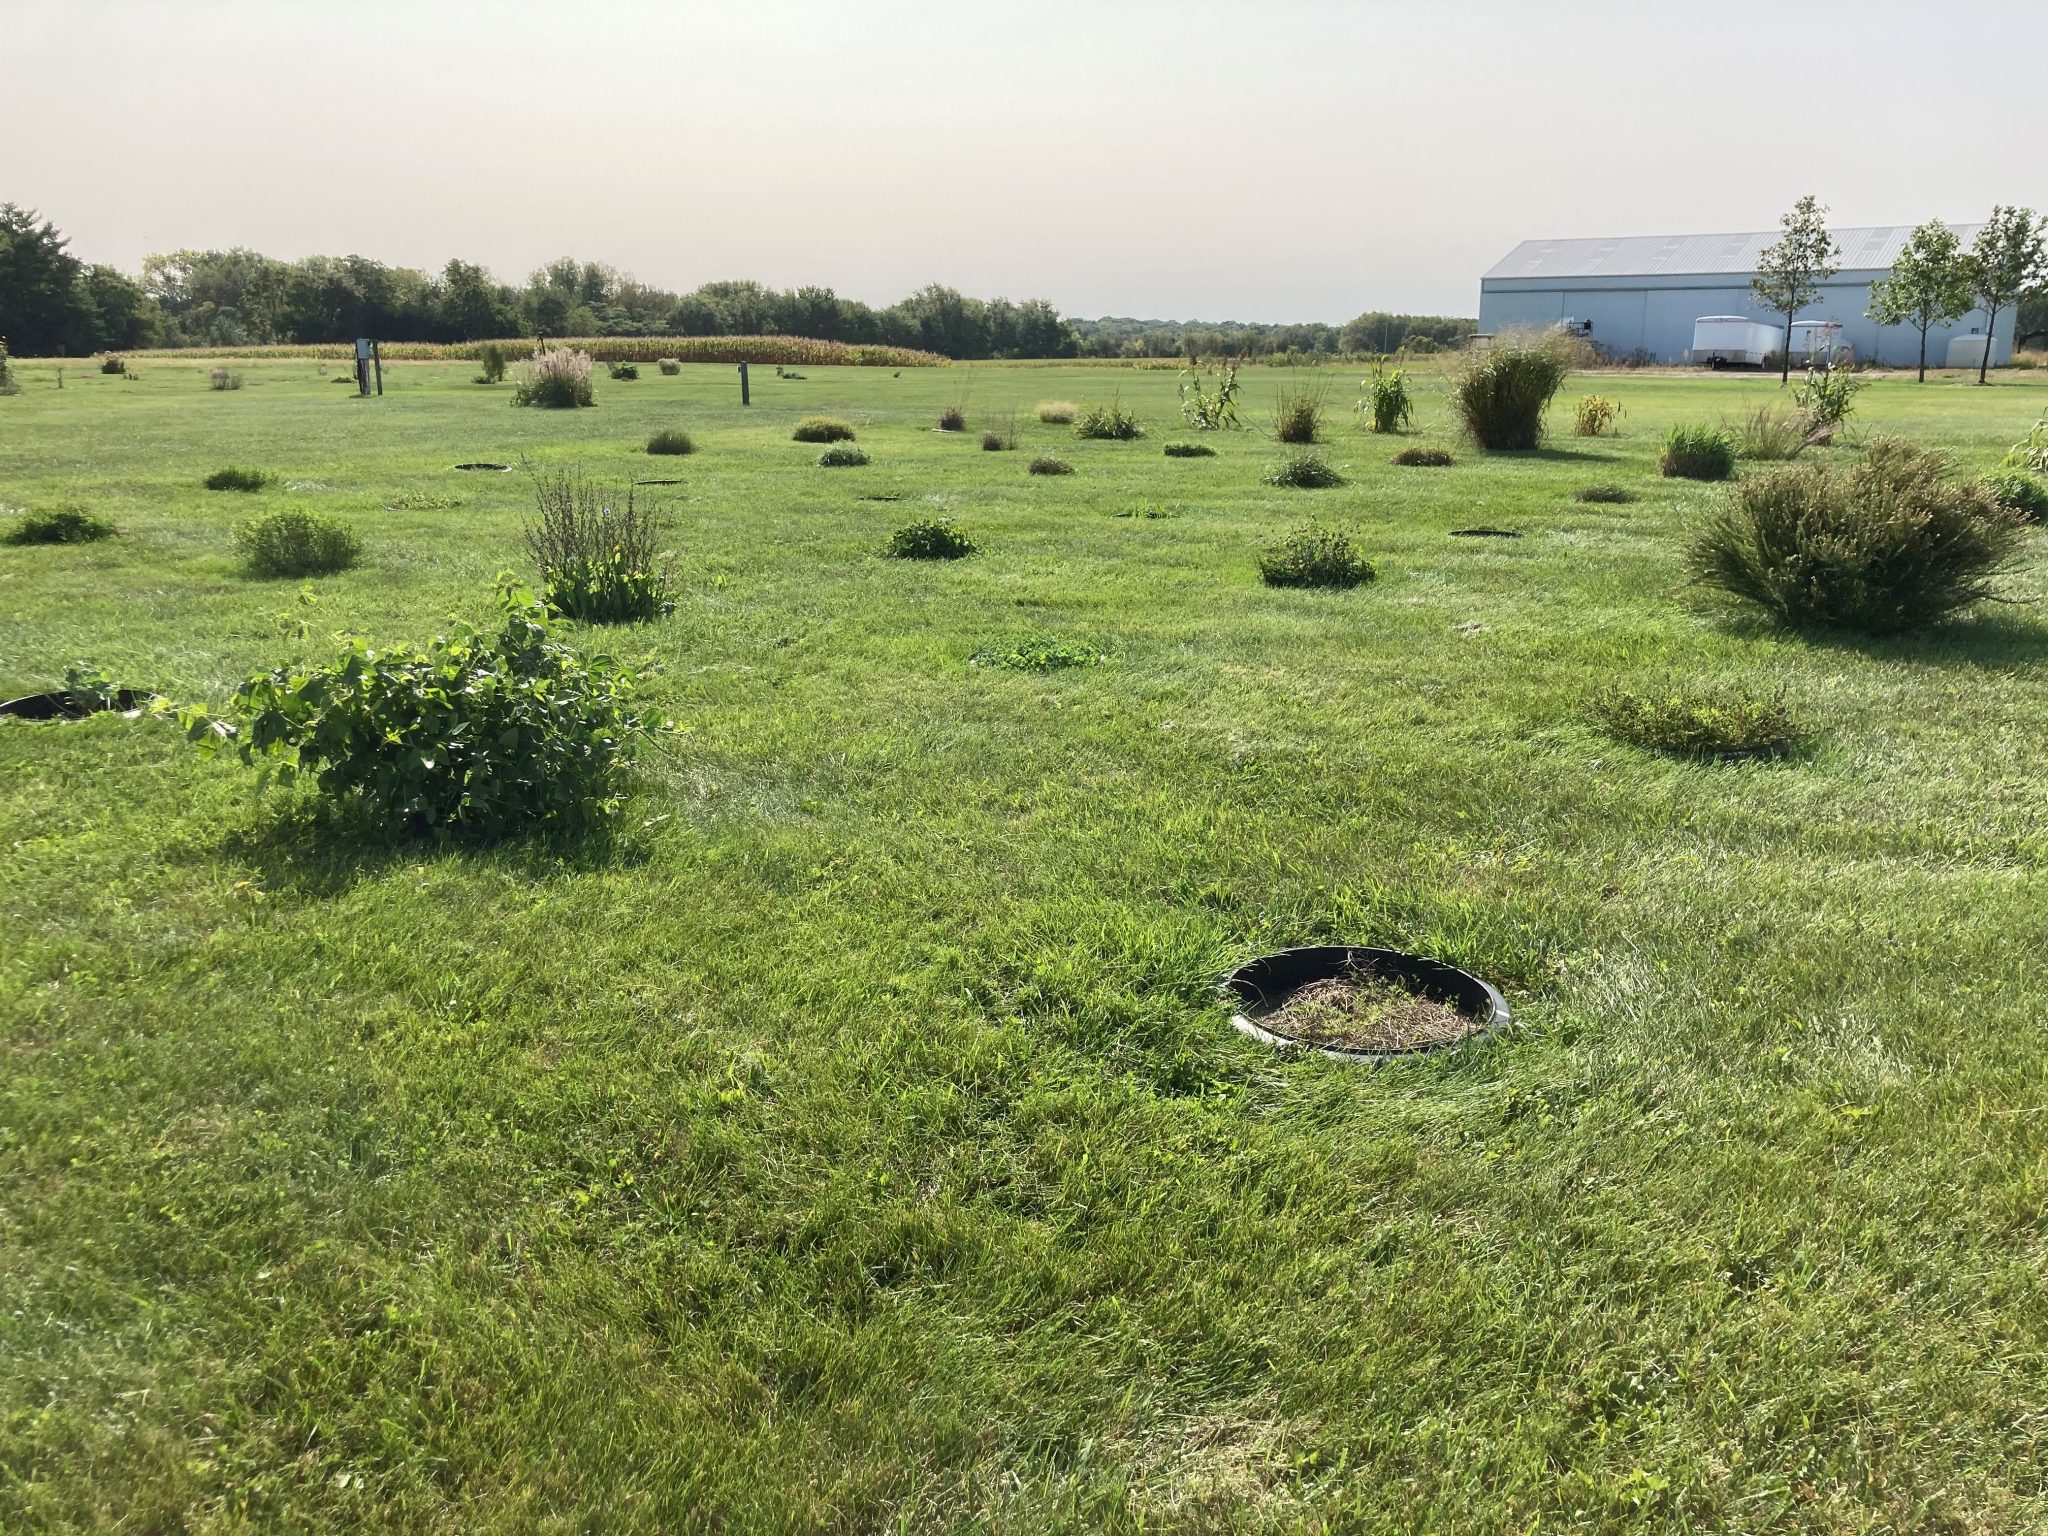 Many forage species at the Purdue University Crop Diagnostic Training and Research Center are used for identification education.